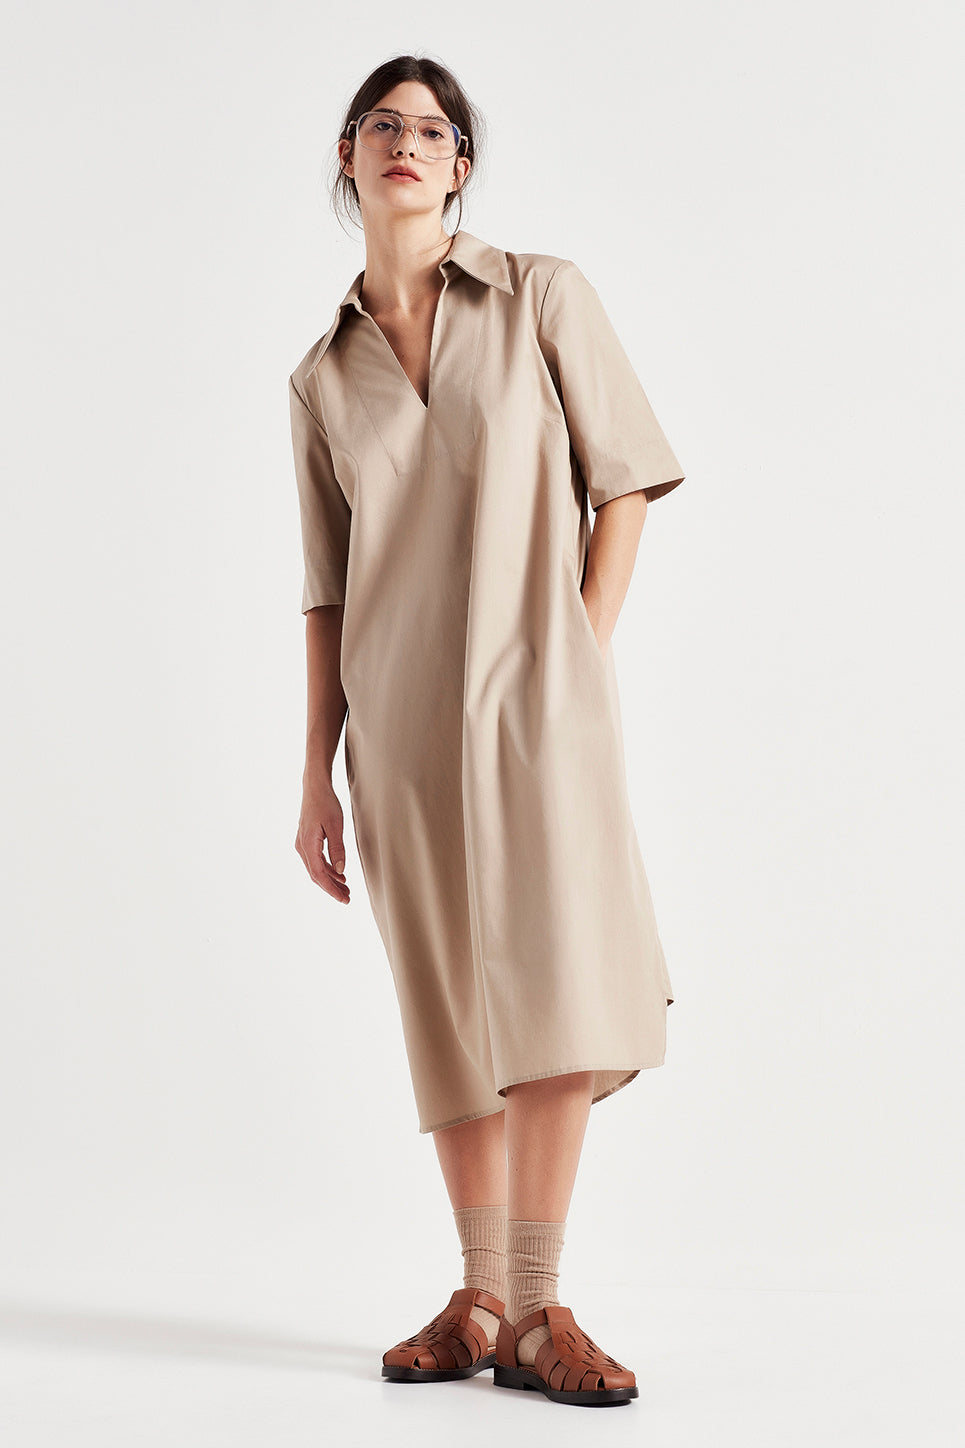 The Devere Shirt Dress in Taupe